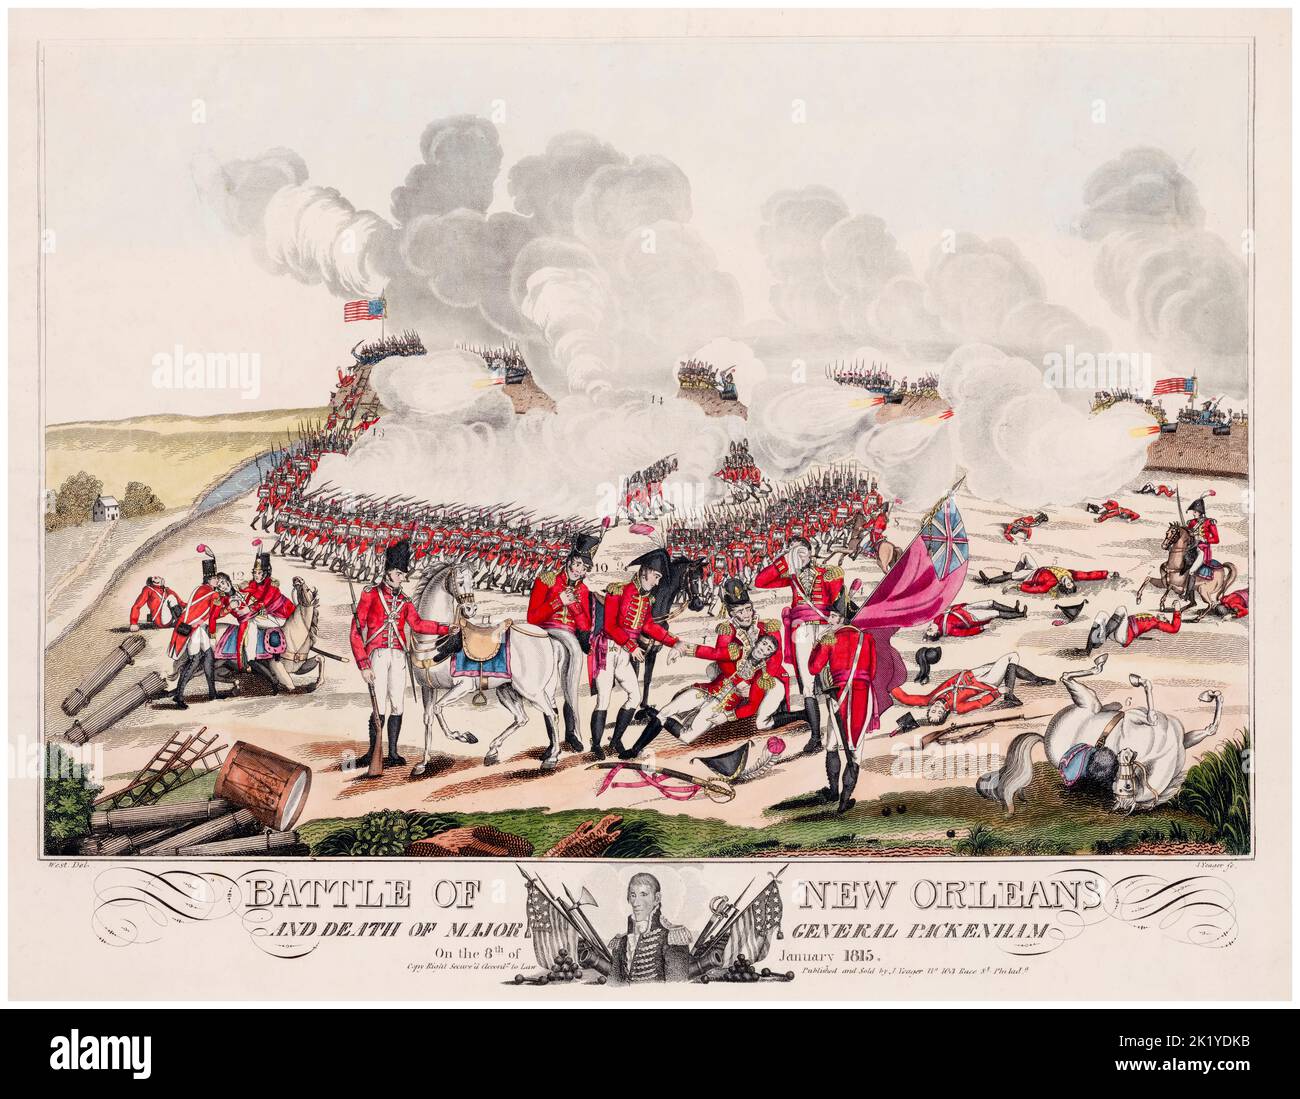 The Battle of New Orleans and Death of Major General Packenham (sic) on the 8th January 1815, aquatint print engraving by William Edward West (artist) and Joseph Yeager (engraver), 1817 Stock Photo